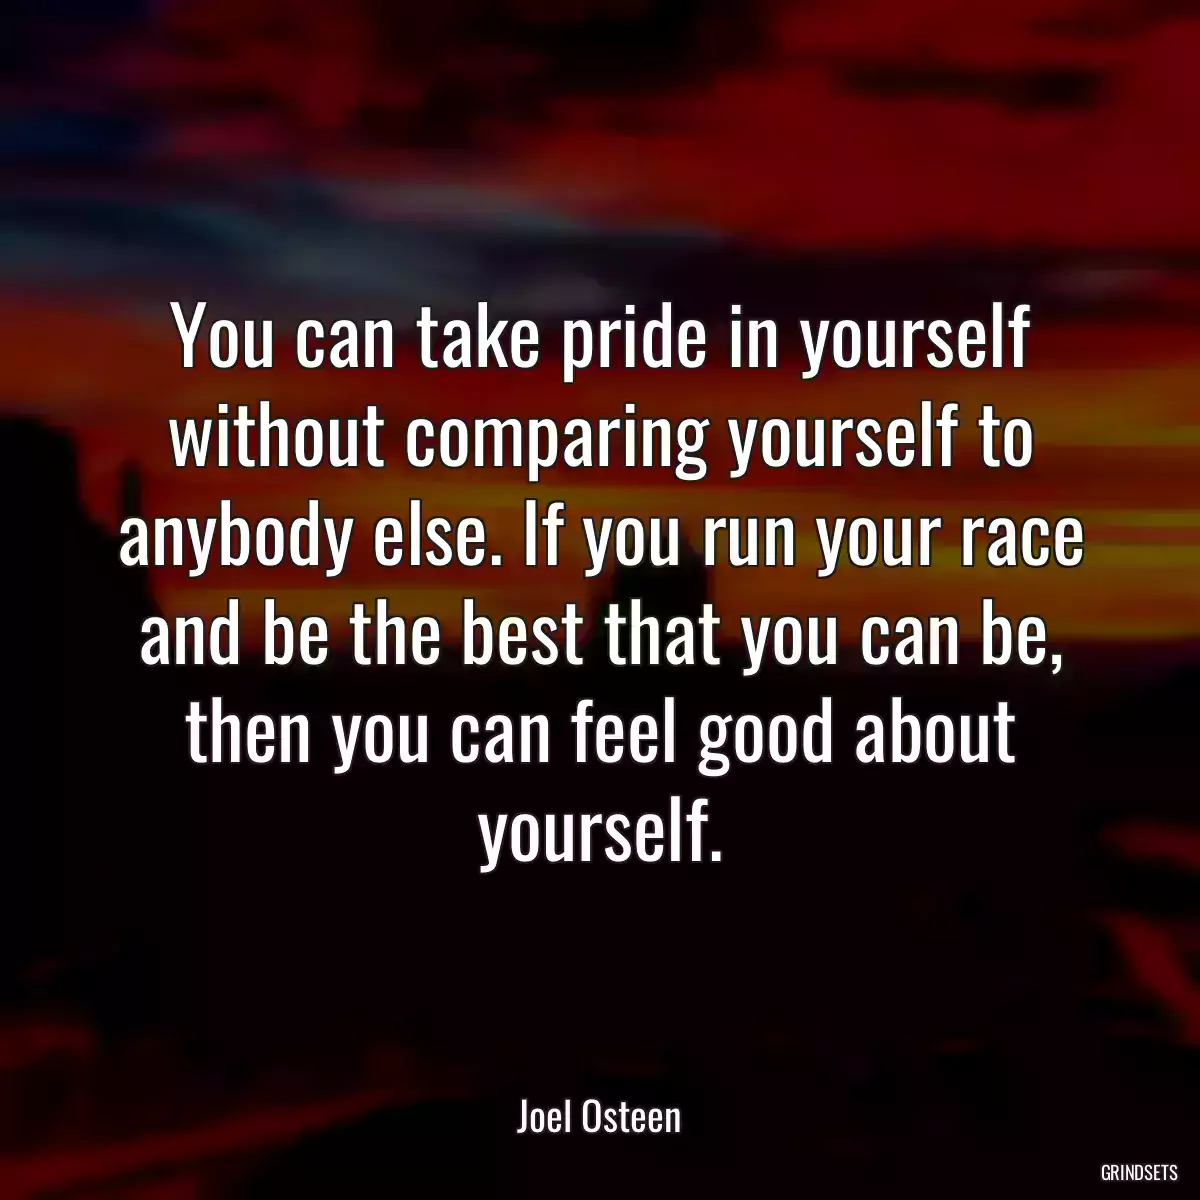 You can take pride in yourself without comparing yourself to anybody else. If you run your race and be the best that you can be, then you can feel good about yourself.